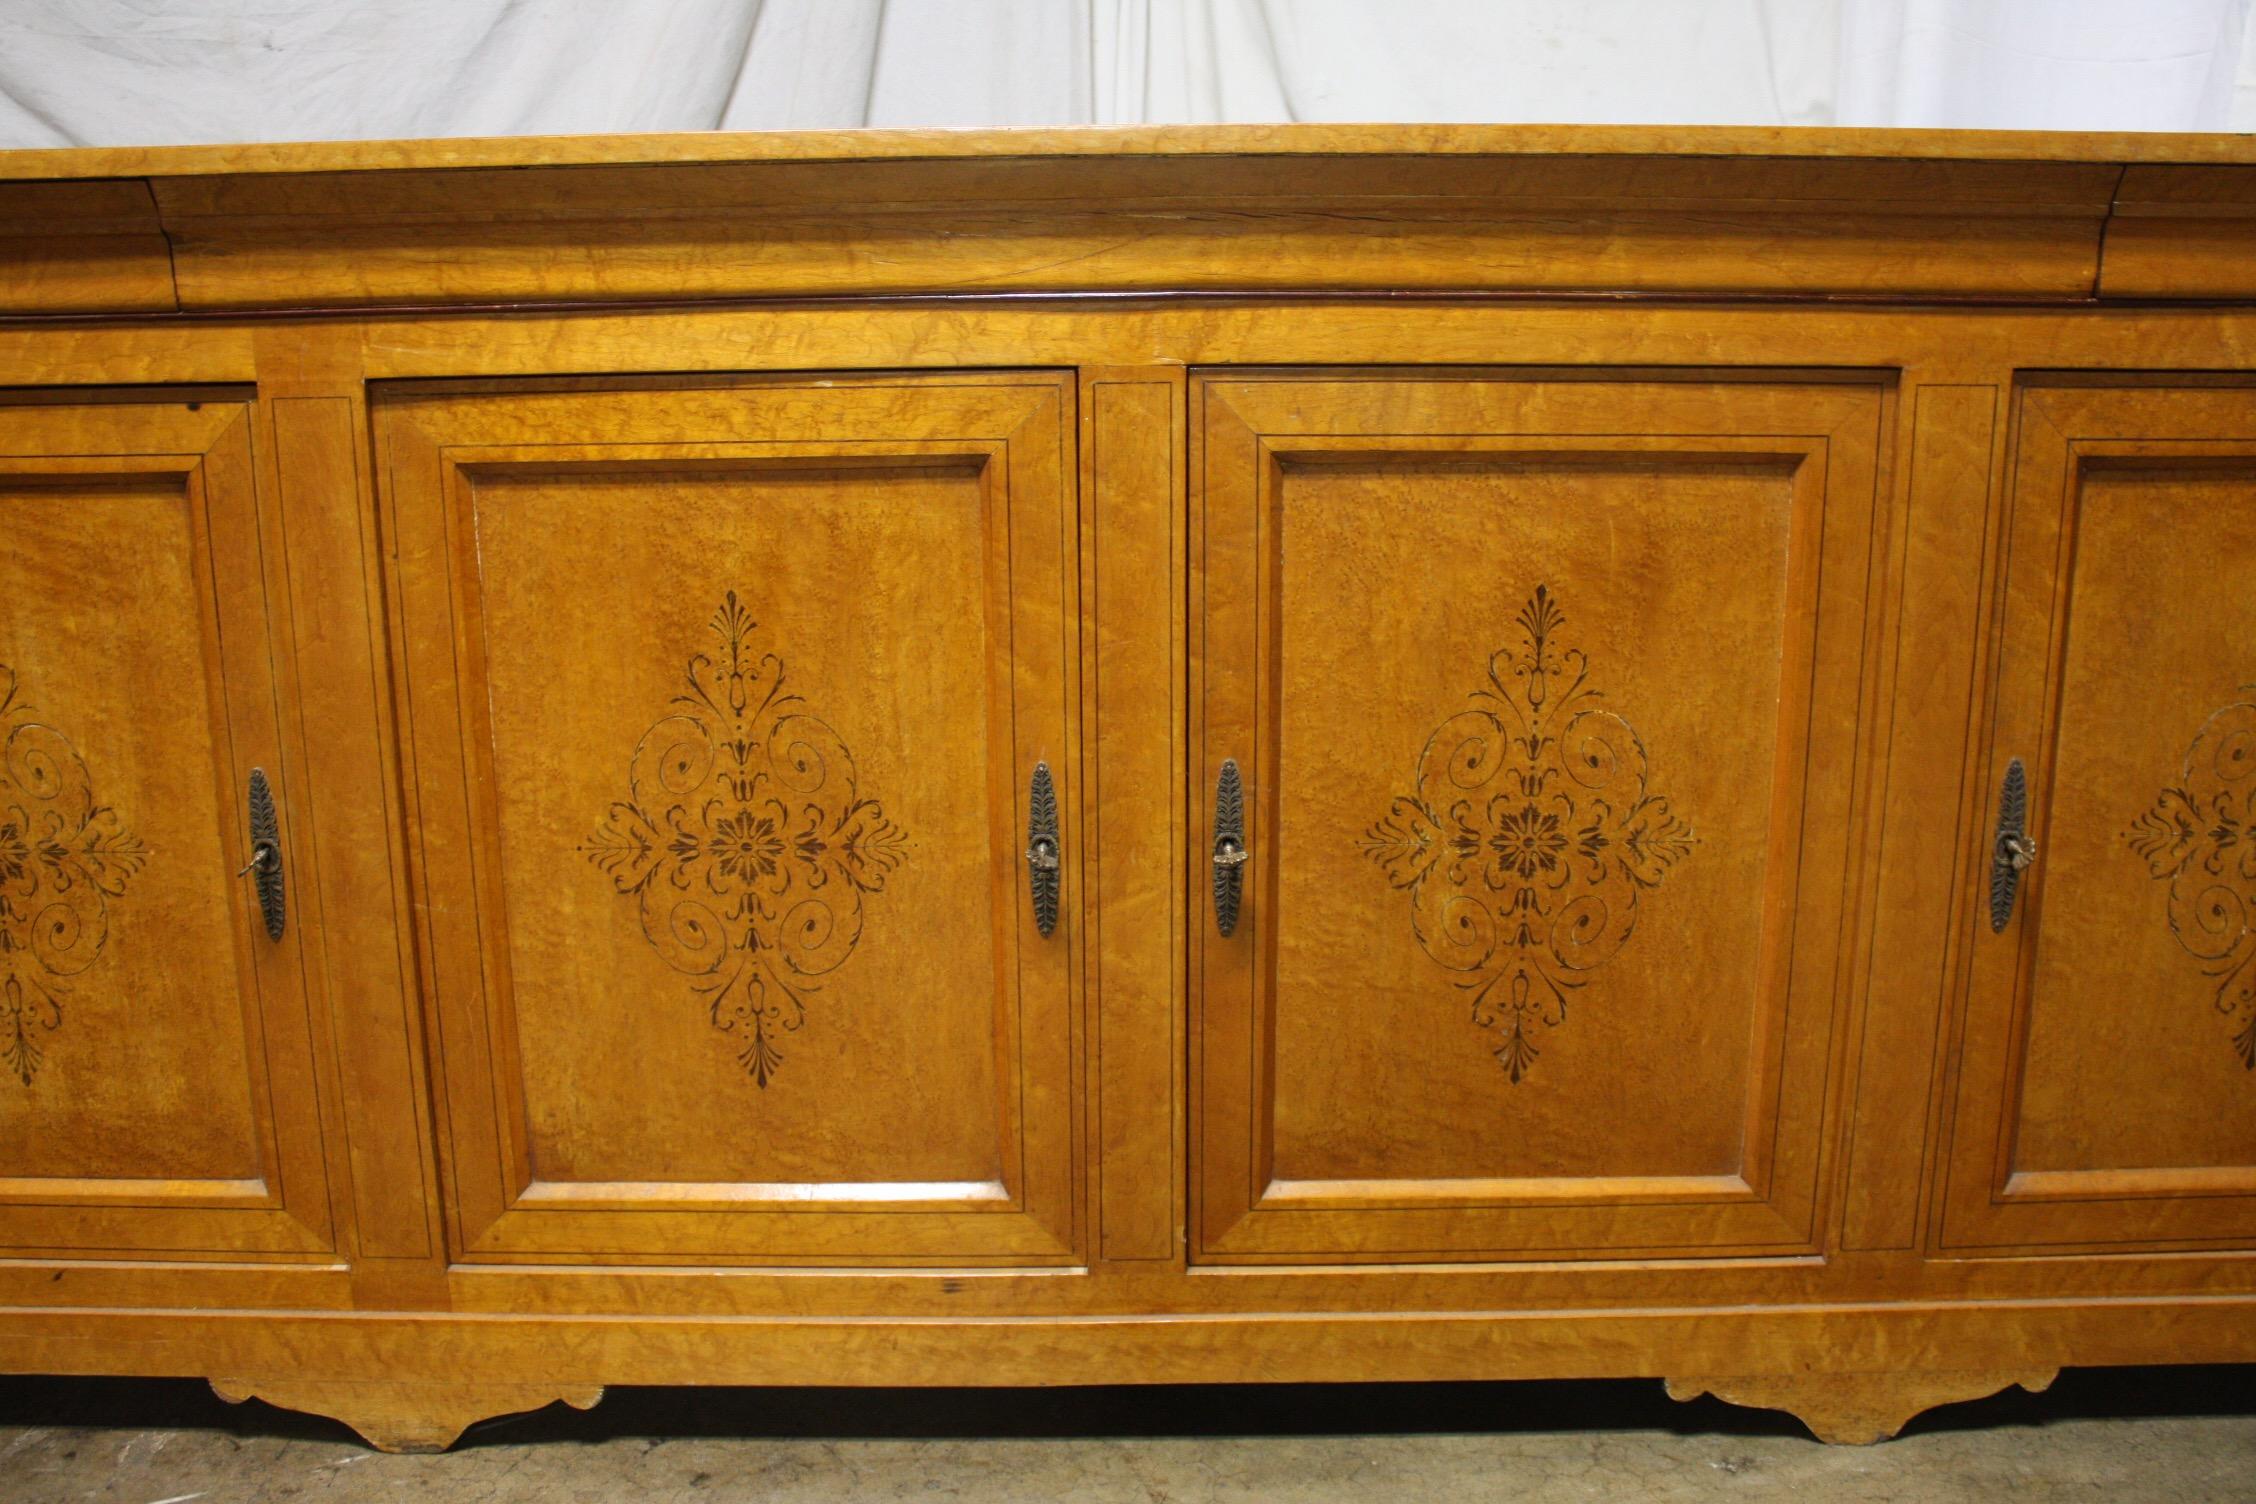 Early 19th Century French Charles X Sideboard In Good Condition For Sale In Stockbridge, GA